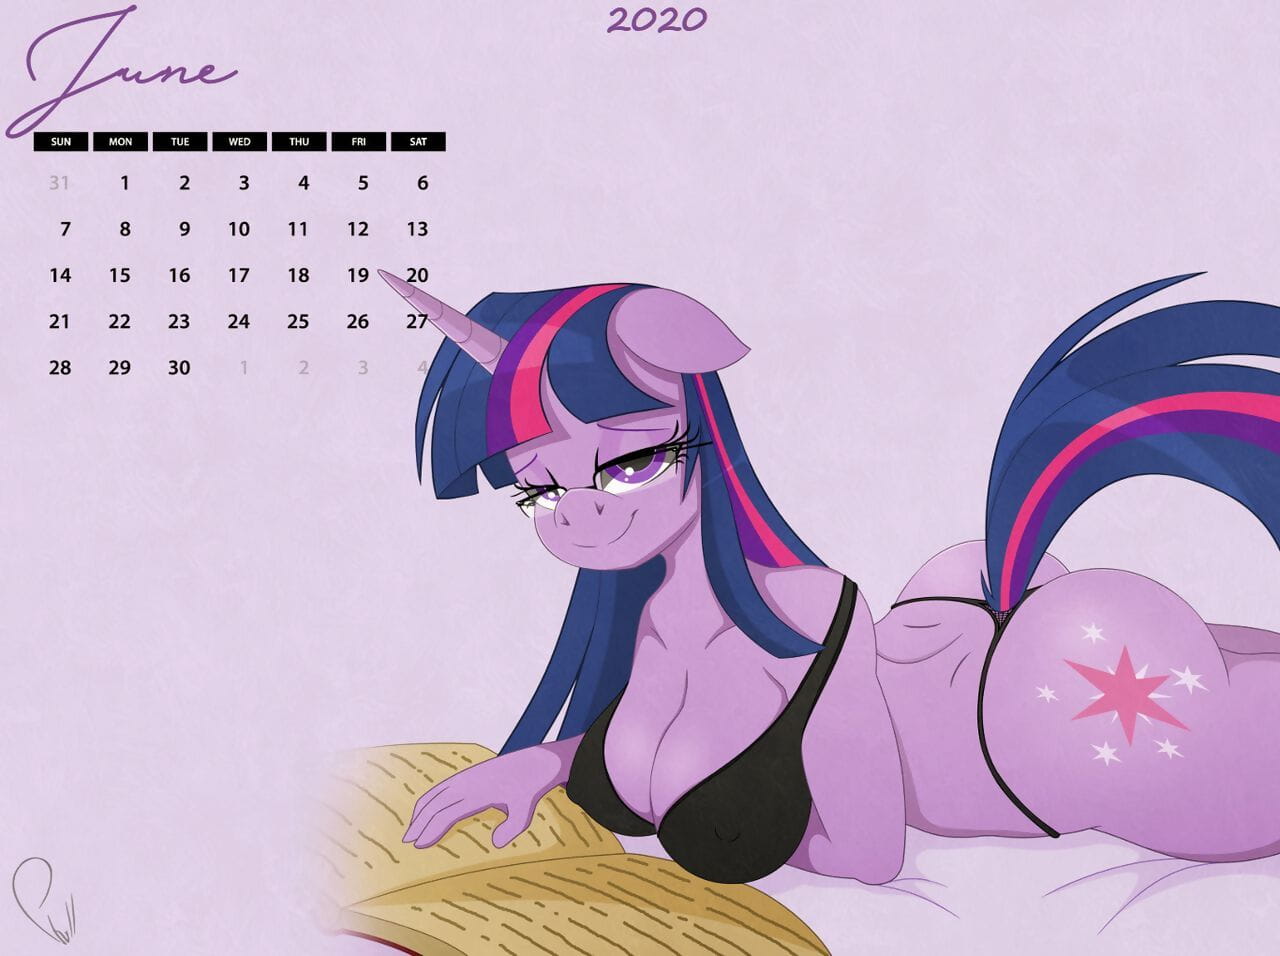 Phyll Anthro Calendar 2020 page 1